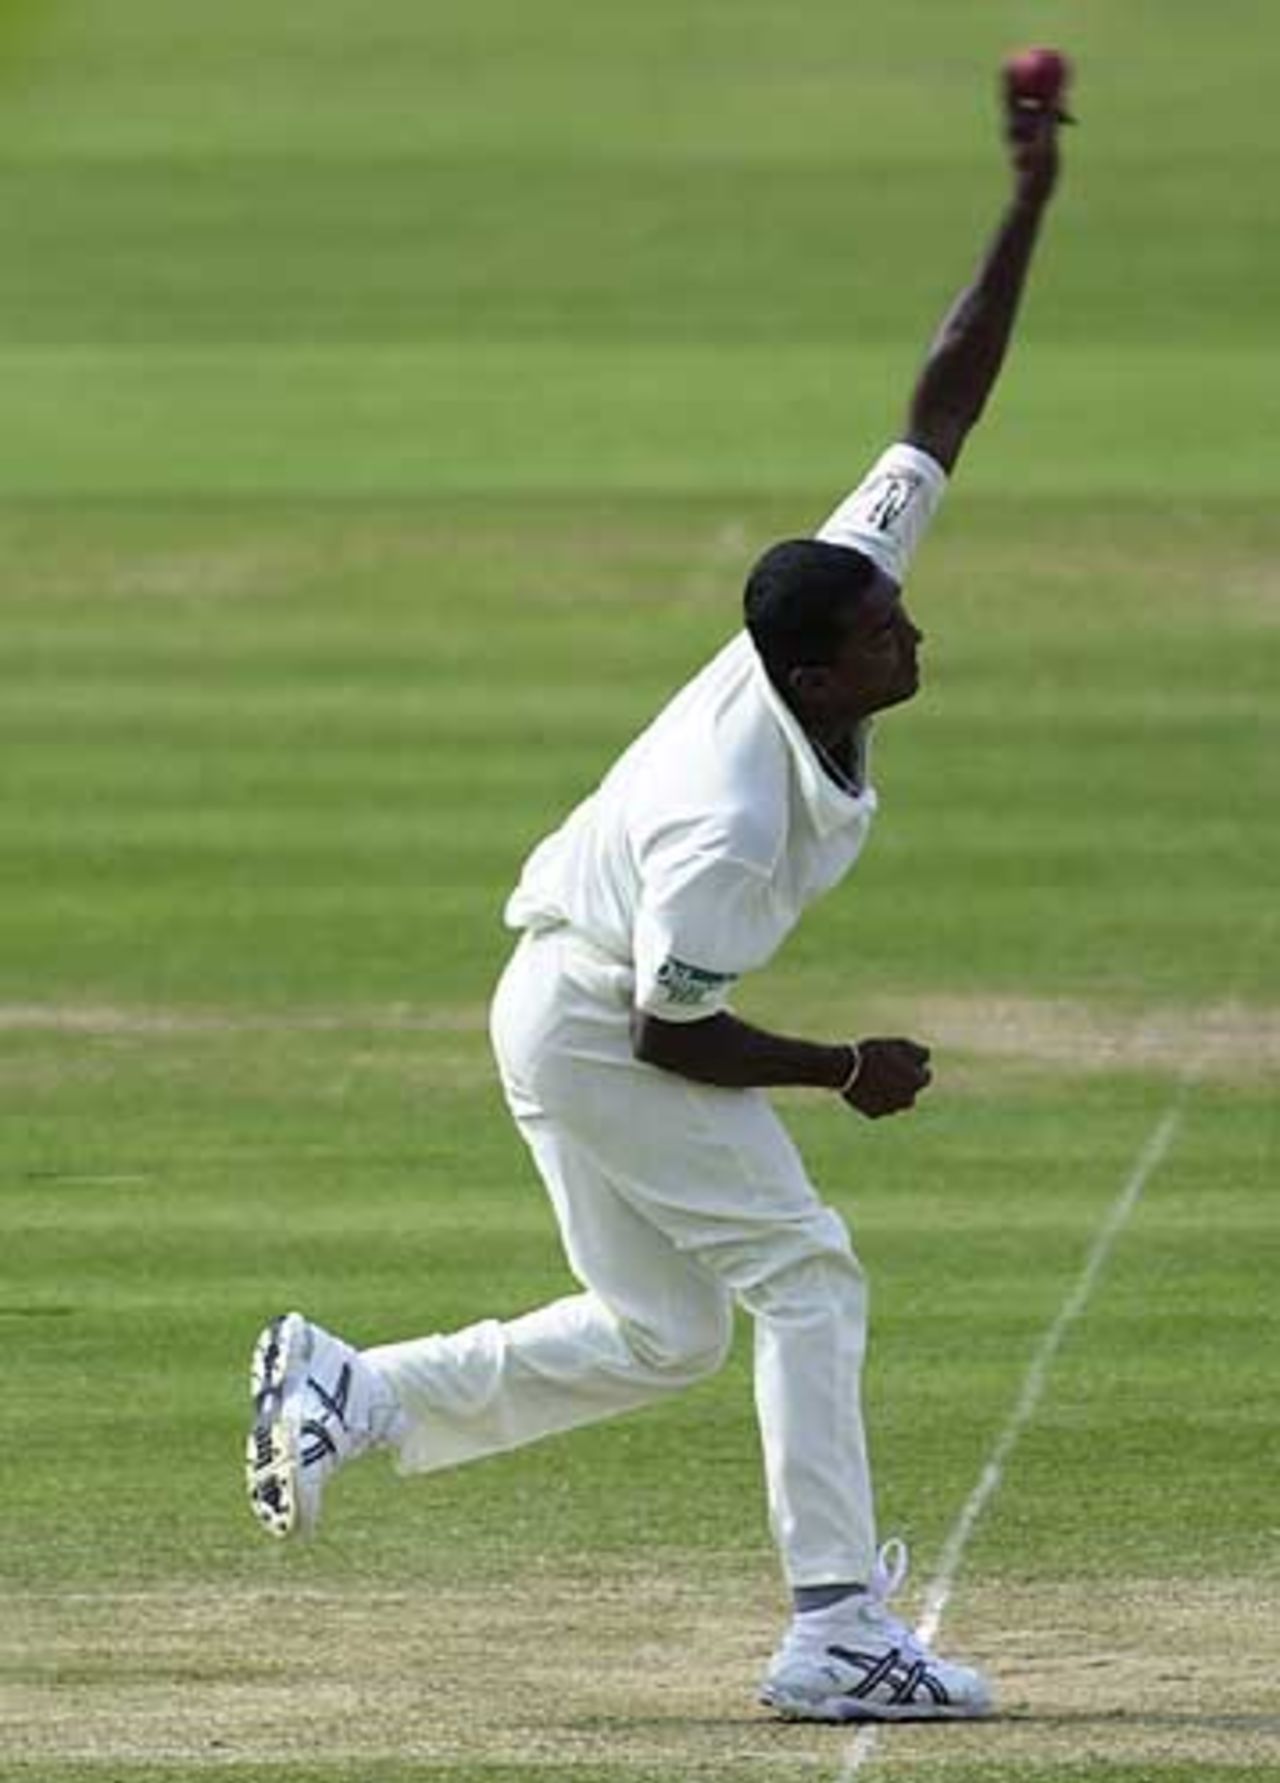 Ruchira Perera bowling from the Pavilion End, England v Sri Lanka, First Test, Lord's 2002